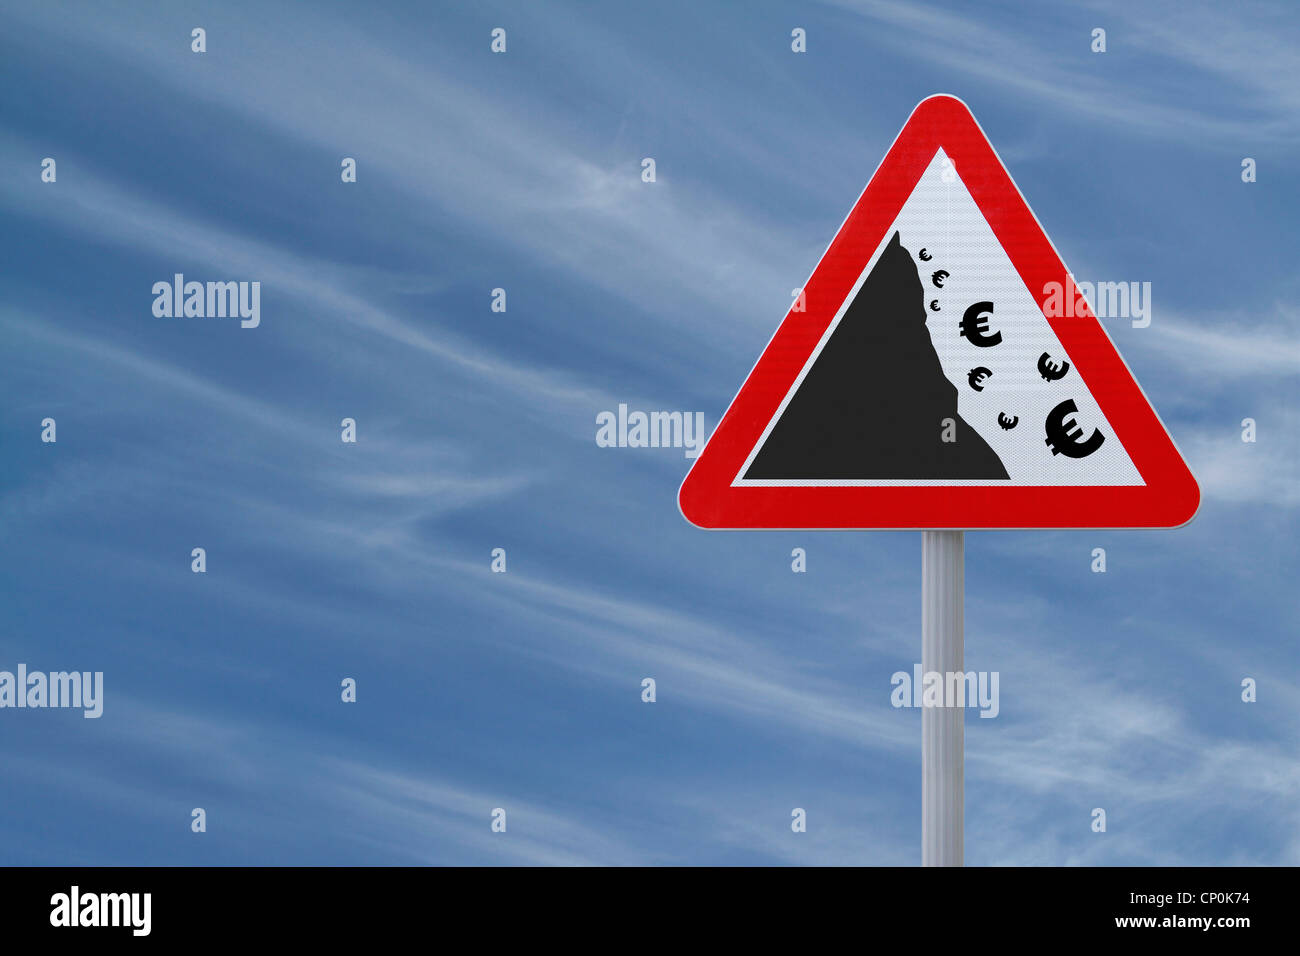 An actual road sign modified to imply the fall or devaluation of the Euro. Applicable for business or financial concepts. Stock Photo